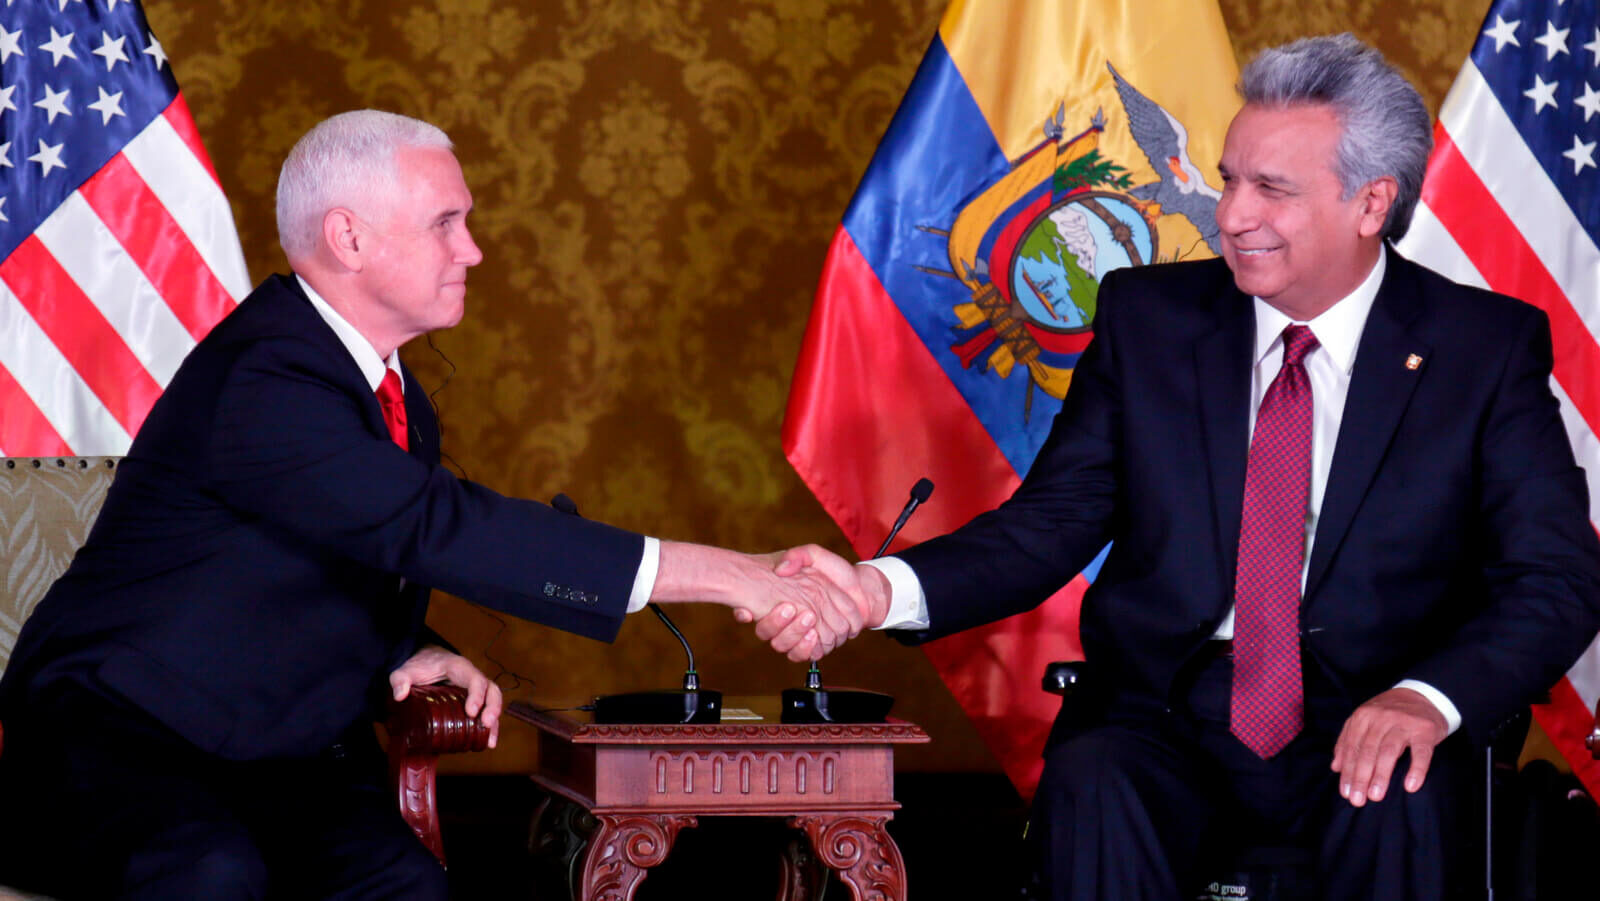 Ecuador's President Lenin Moreno, right, shakes hand with U.S. Vice President Mike Pence at the government palace in Quito, Ecuador, June 28, 2018. Dolores Ochoa | AP